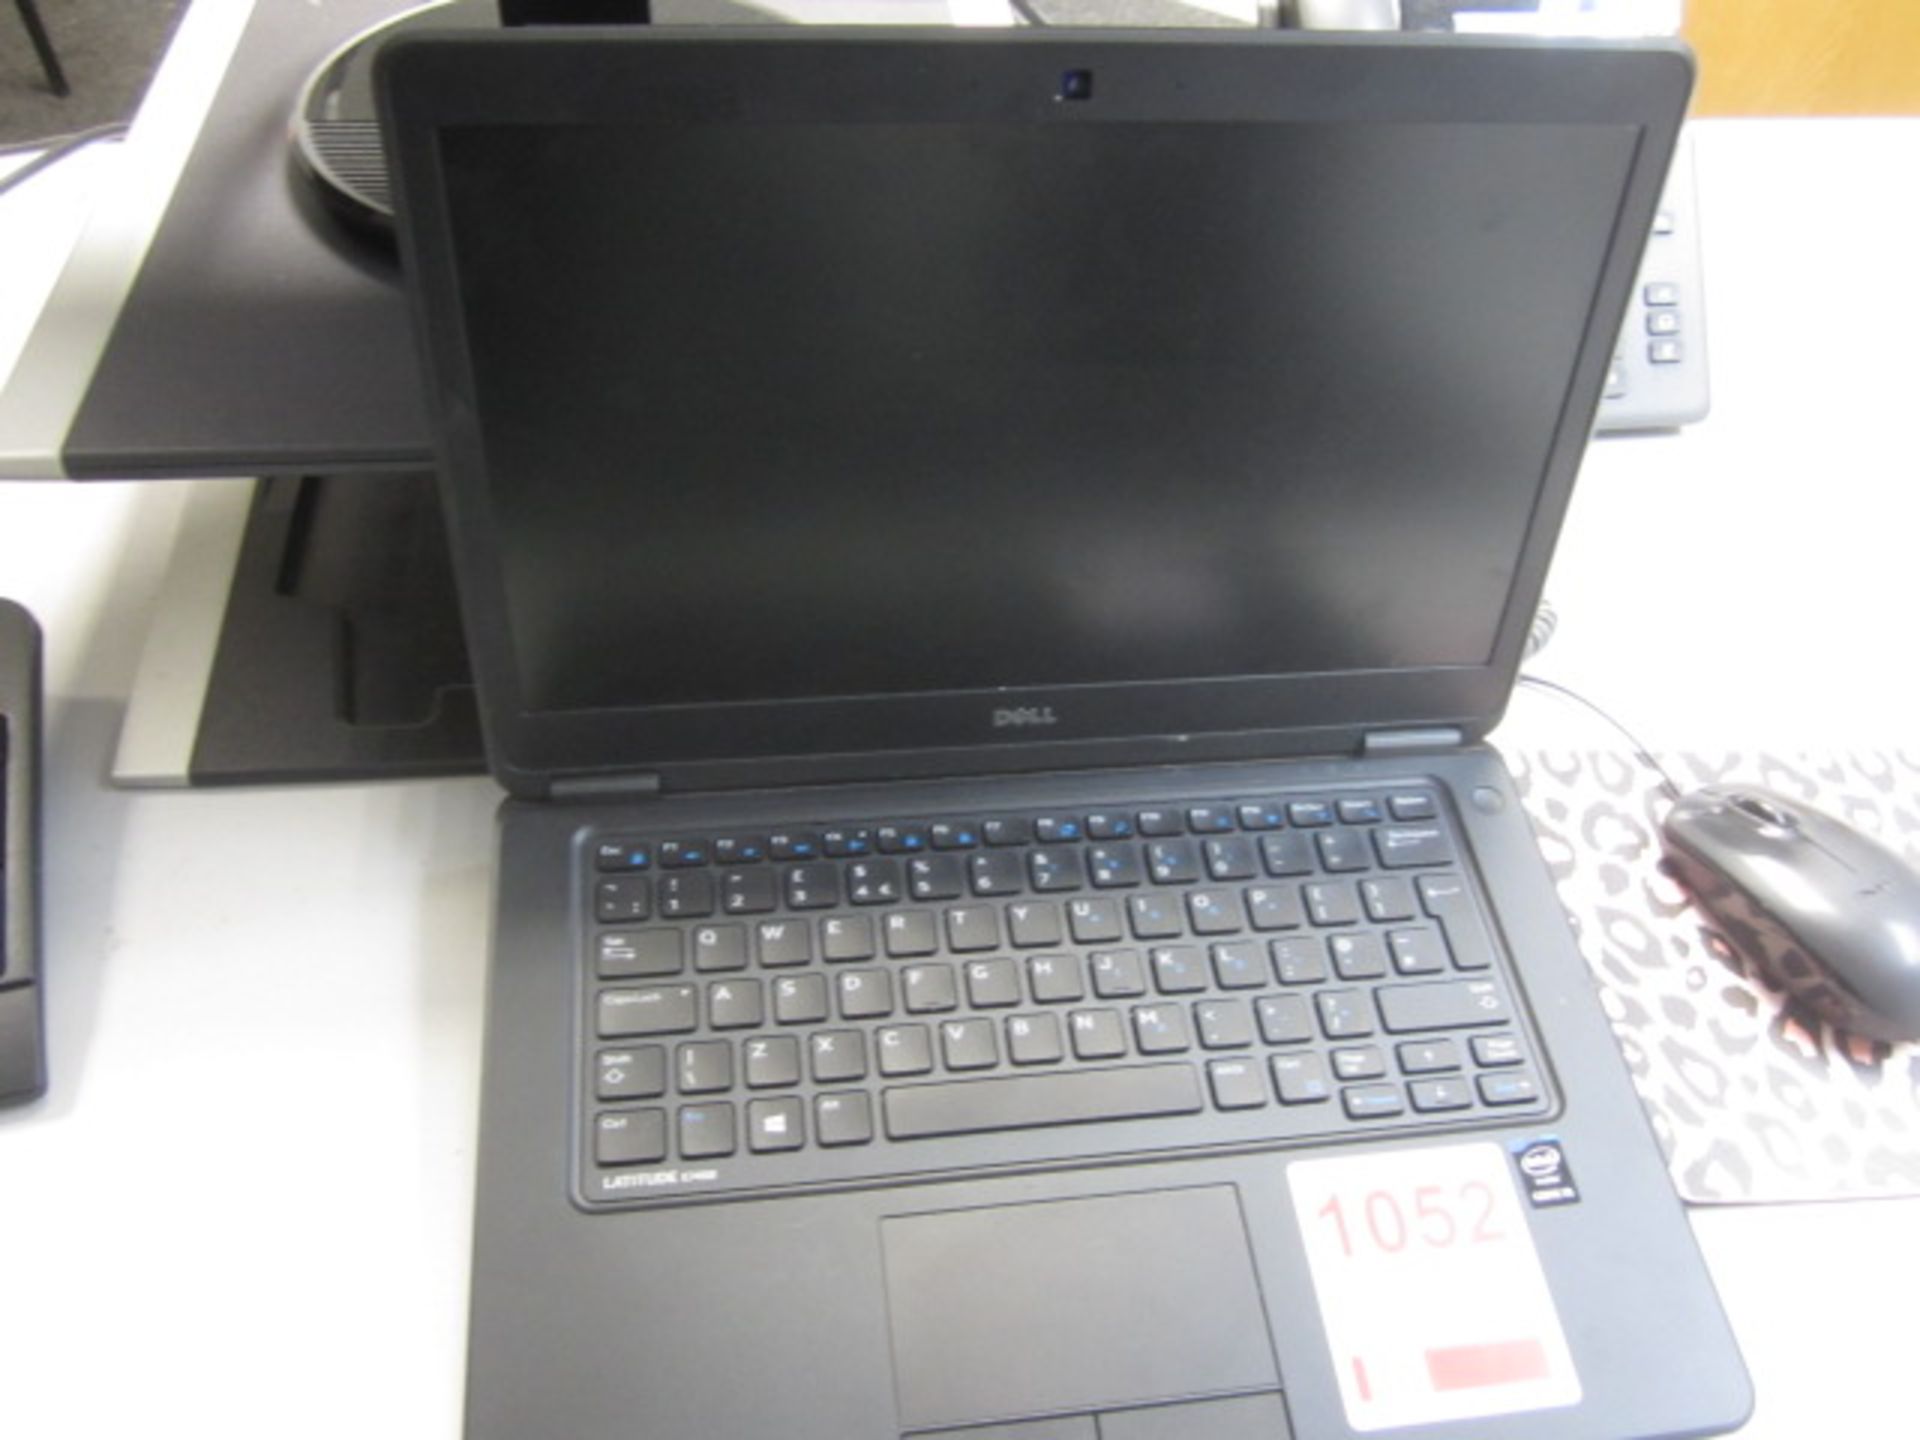 Dell Latitude E7450 Core i5 laptop, Dell docking station, two flat screen monitors, keyboard, mouse - Image 2 of 2